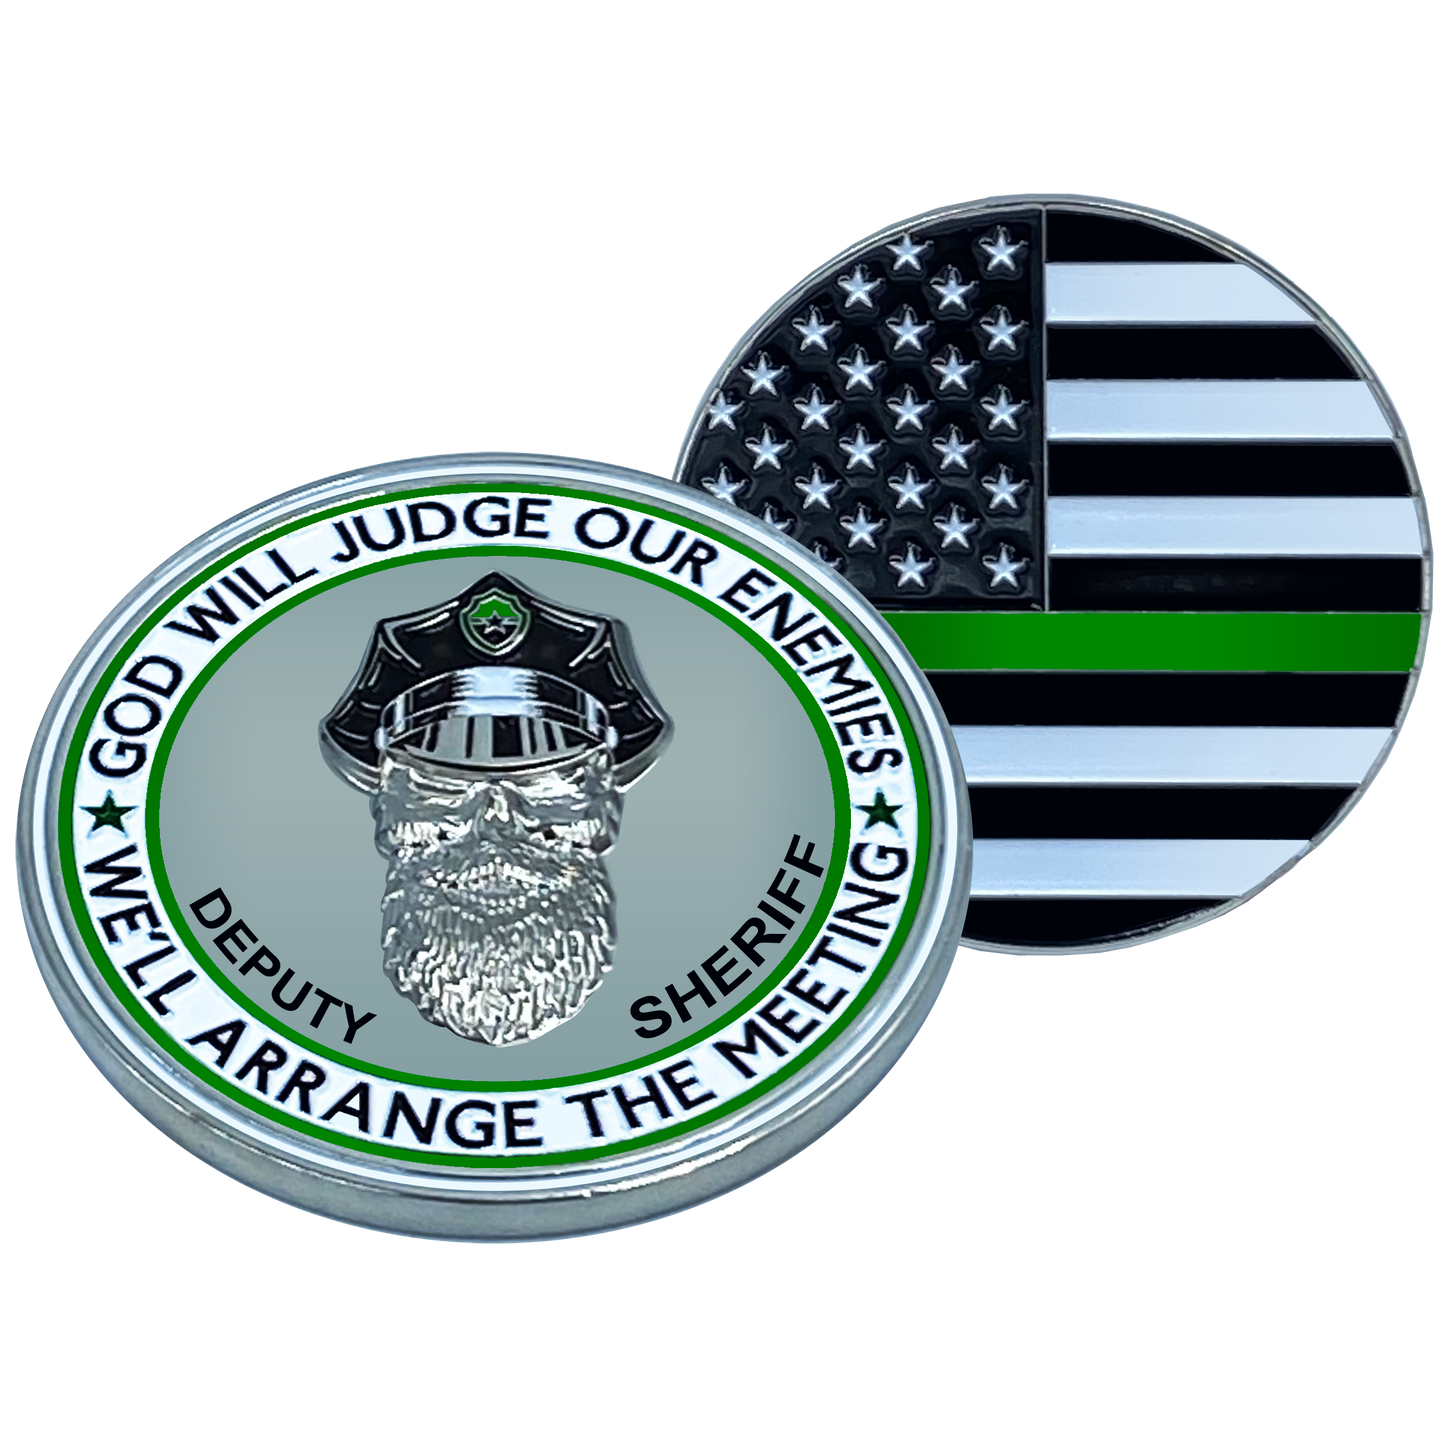 EL1-008 Thin Green Line DEPUTY SHERIFF Police God Will Judge BEARD GANG SKULL Challenge Coin City of Police Department Back the Blue